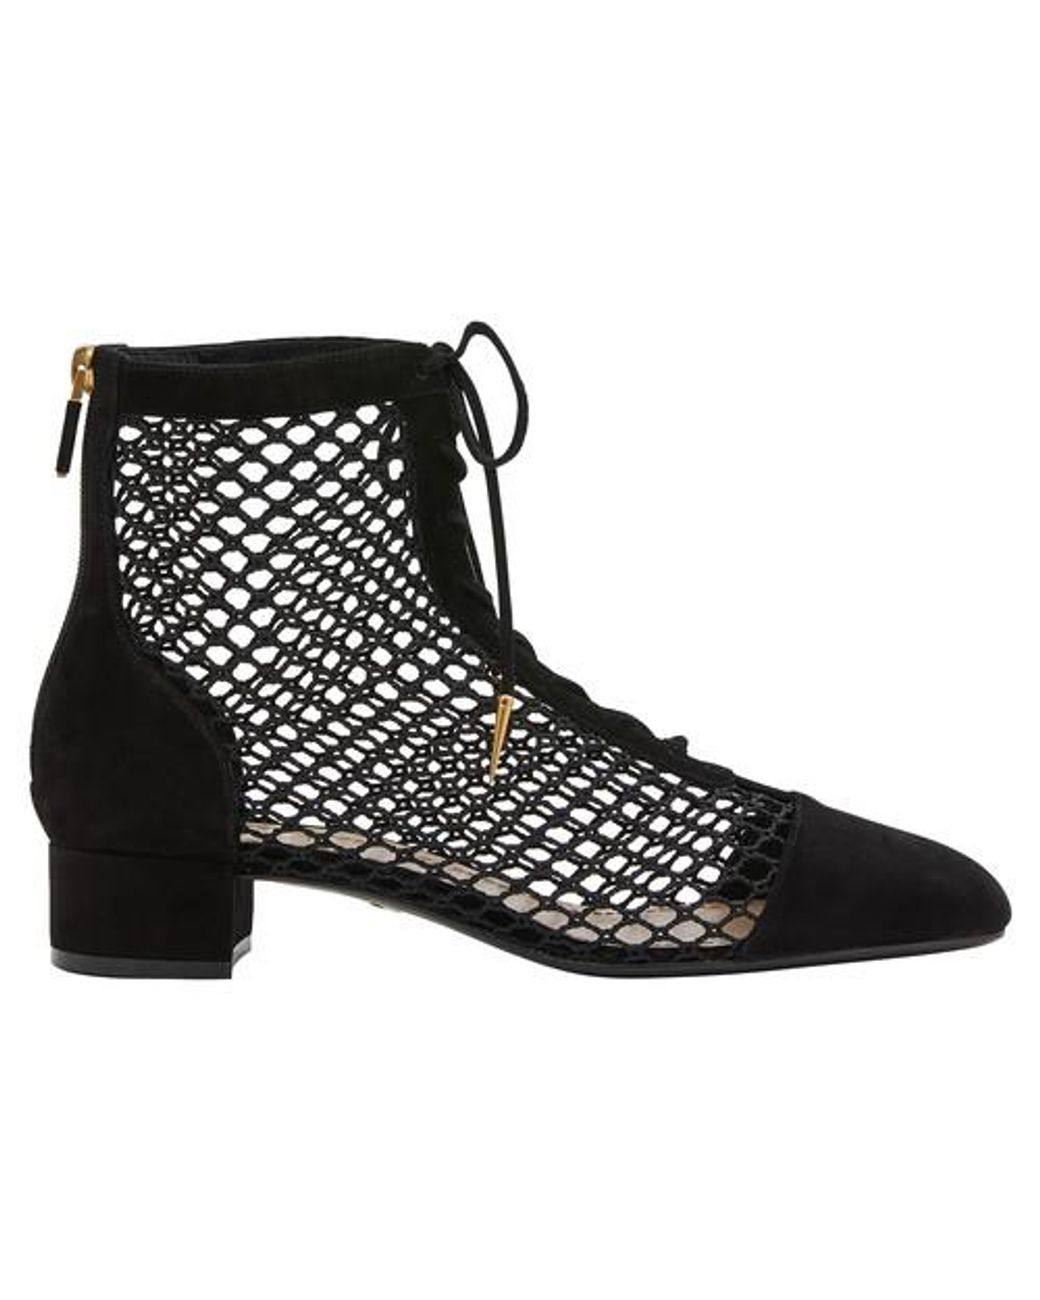 Luxury shoes for women  Dior laceup boots in black patent leather